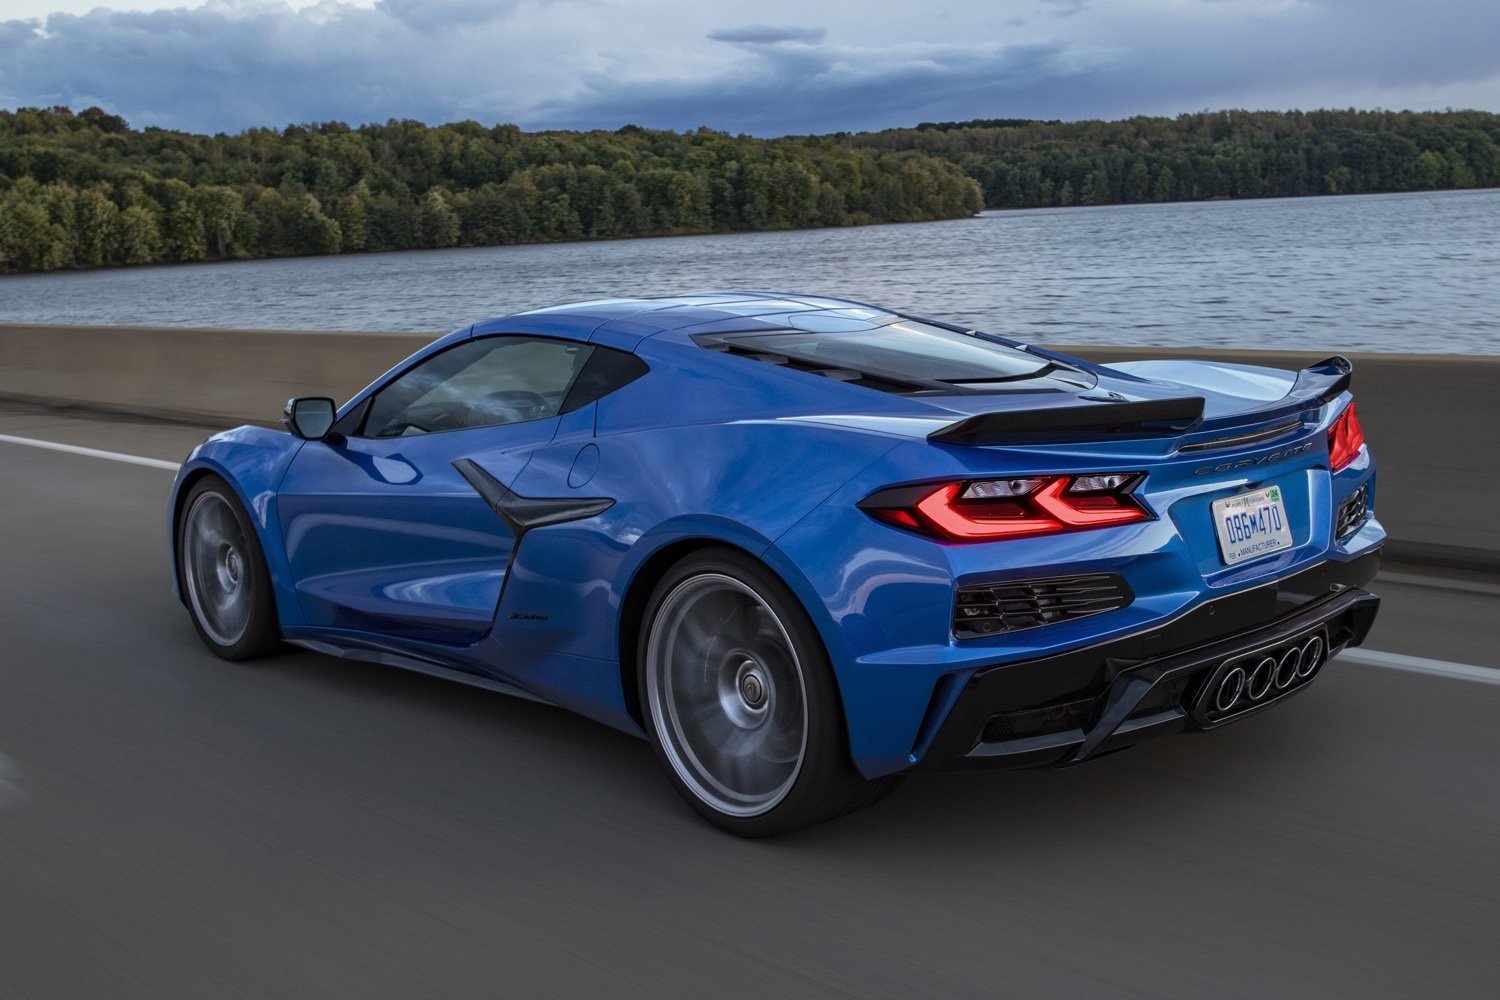 Rick Hendrick paid $3.6 million at auction for a 2023 Corvette Z06 similar to this model. | Chevrolet